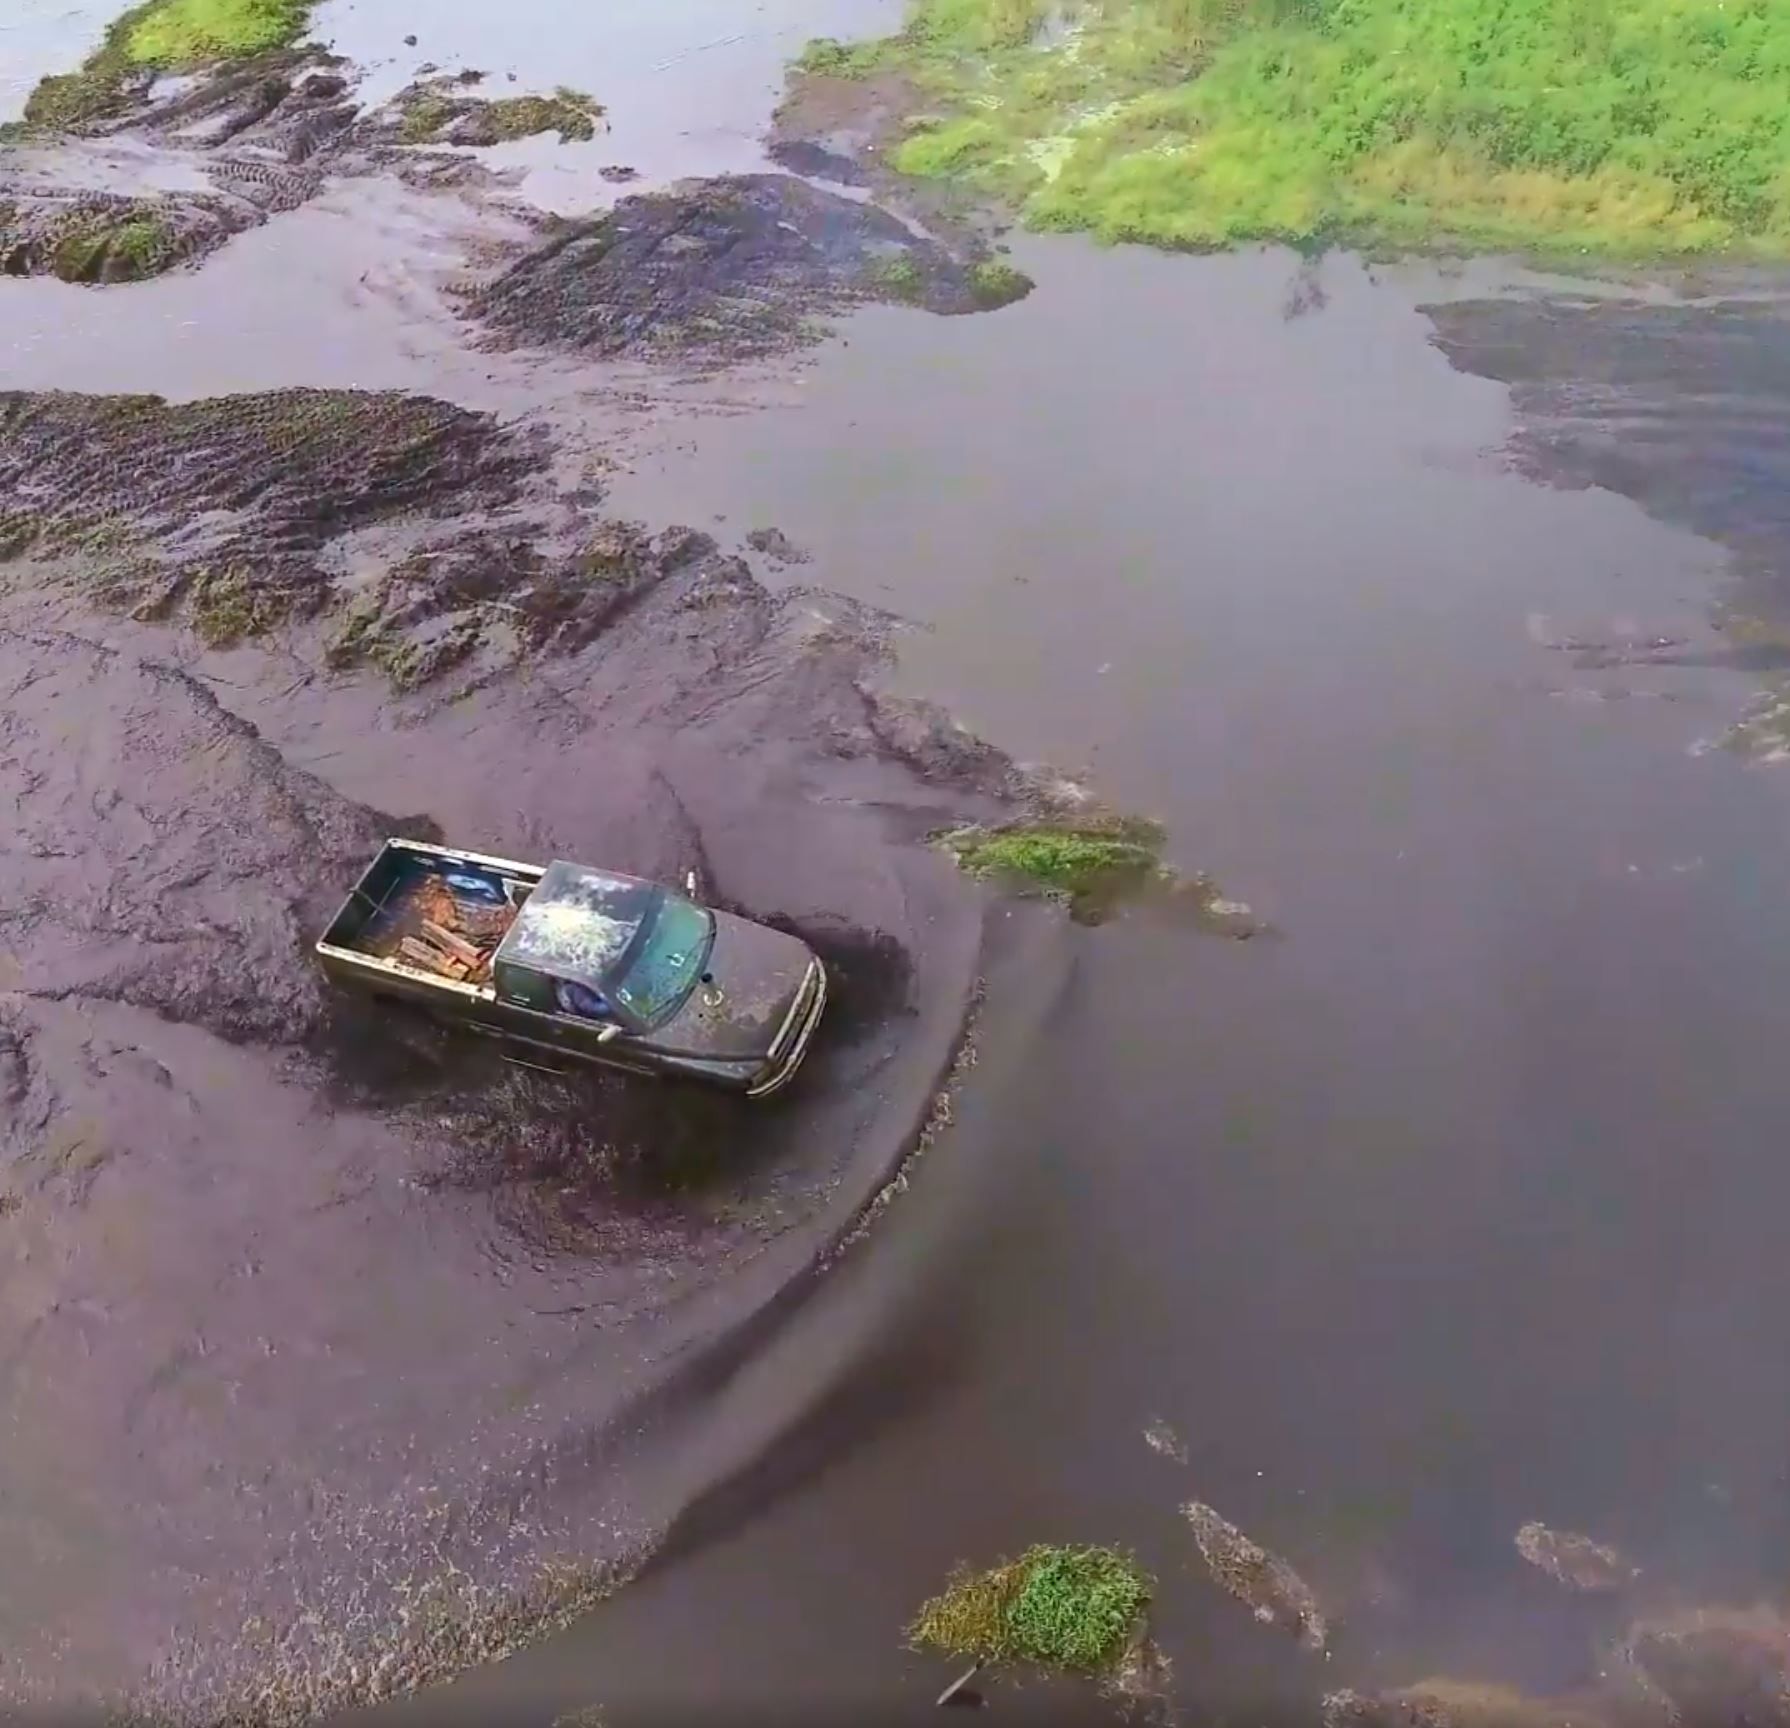 This is a Diesel Dodge Ram in a Florida Mud Bog as featured on MotorTrend's Dirt Every Day